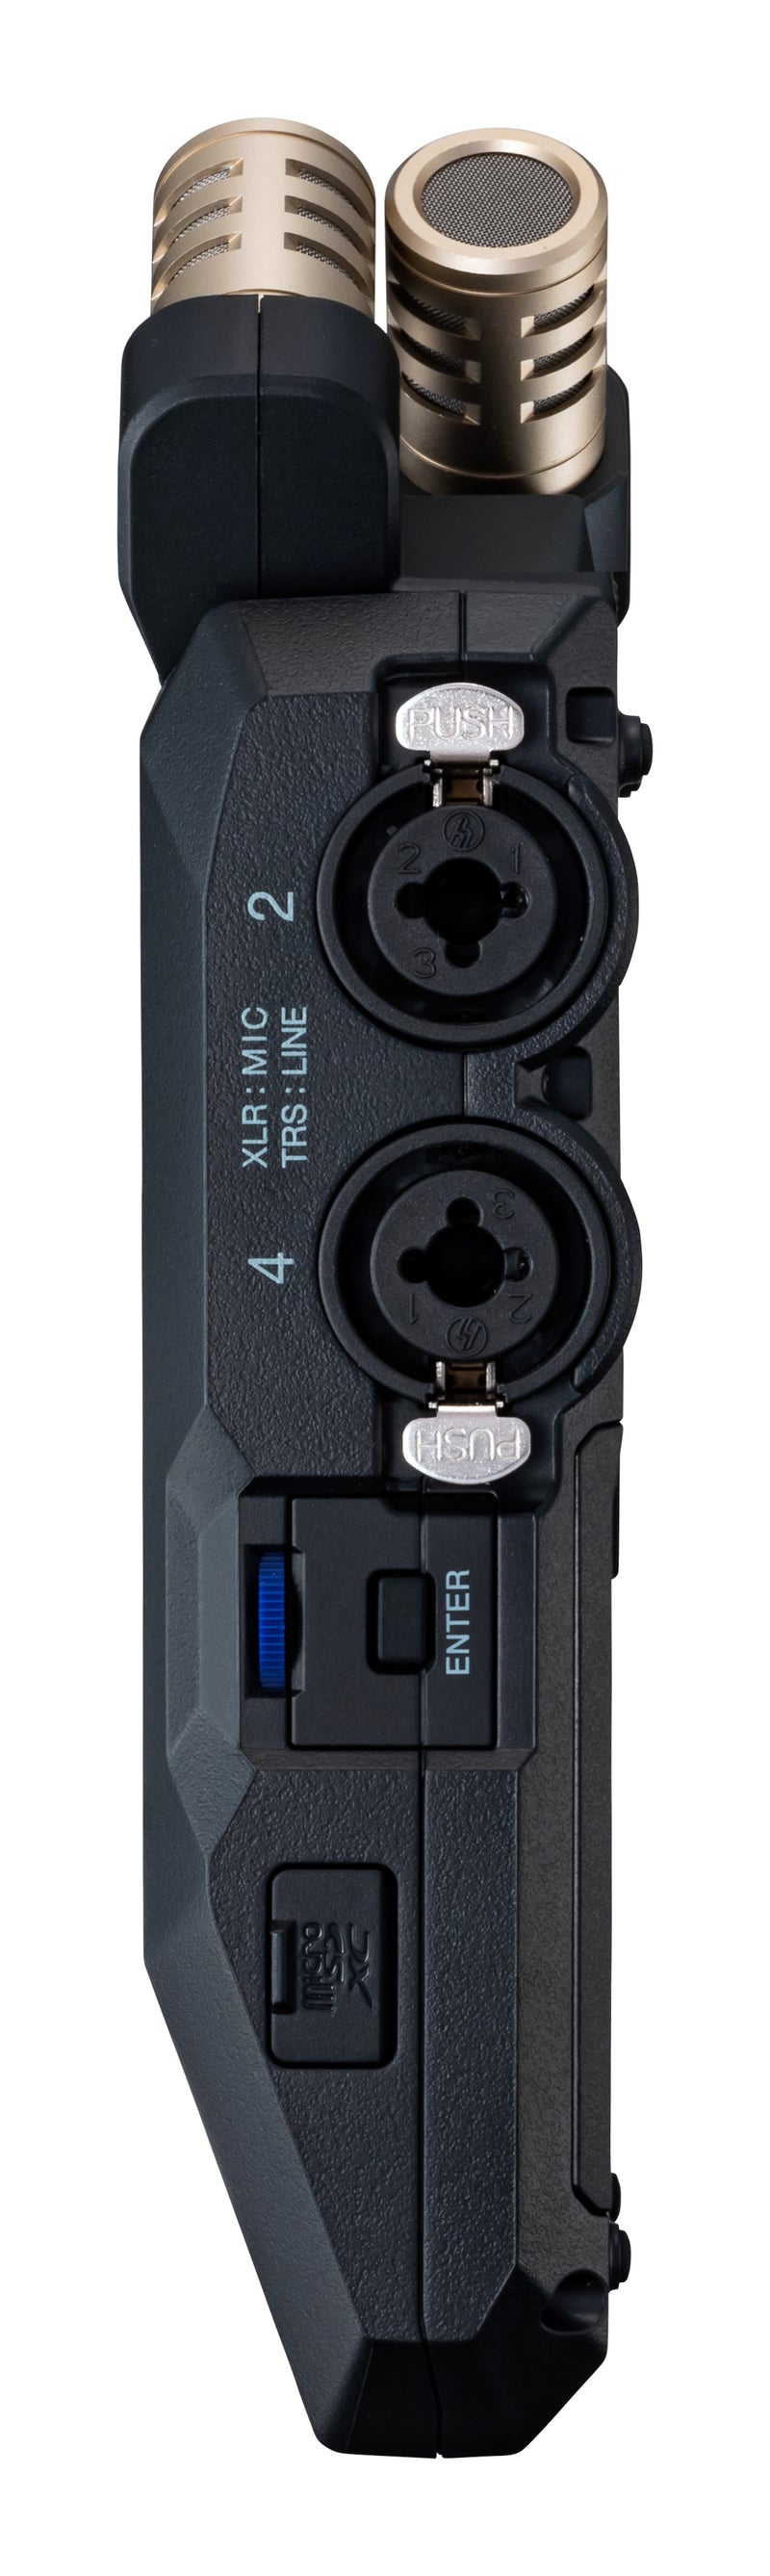 Zoom H6ESSENTIAL 6-Track 32-Bit Float Recording with 4 Mic/Line Inputs with XLR/TRS Combo Connectors